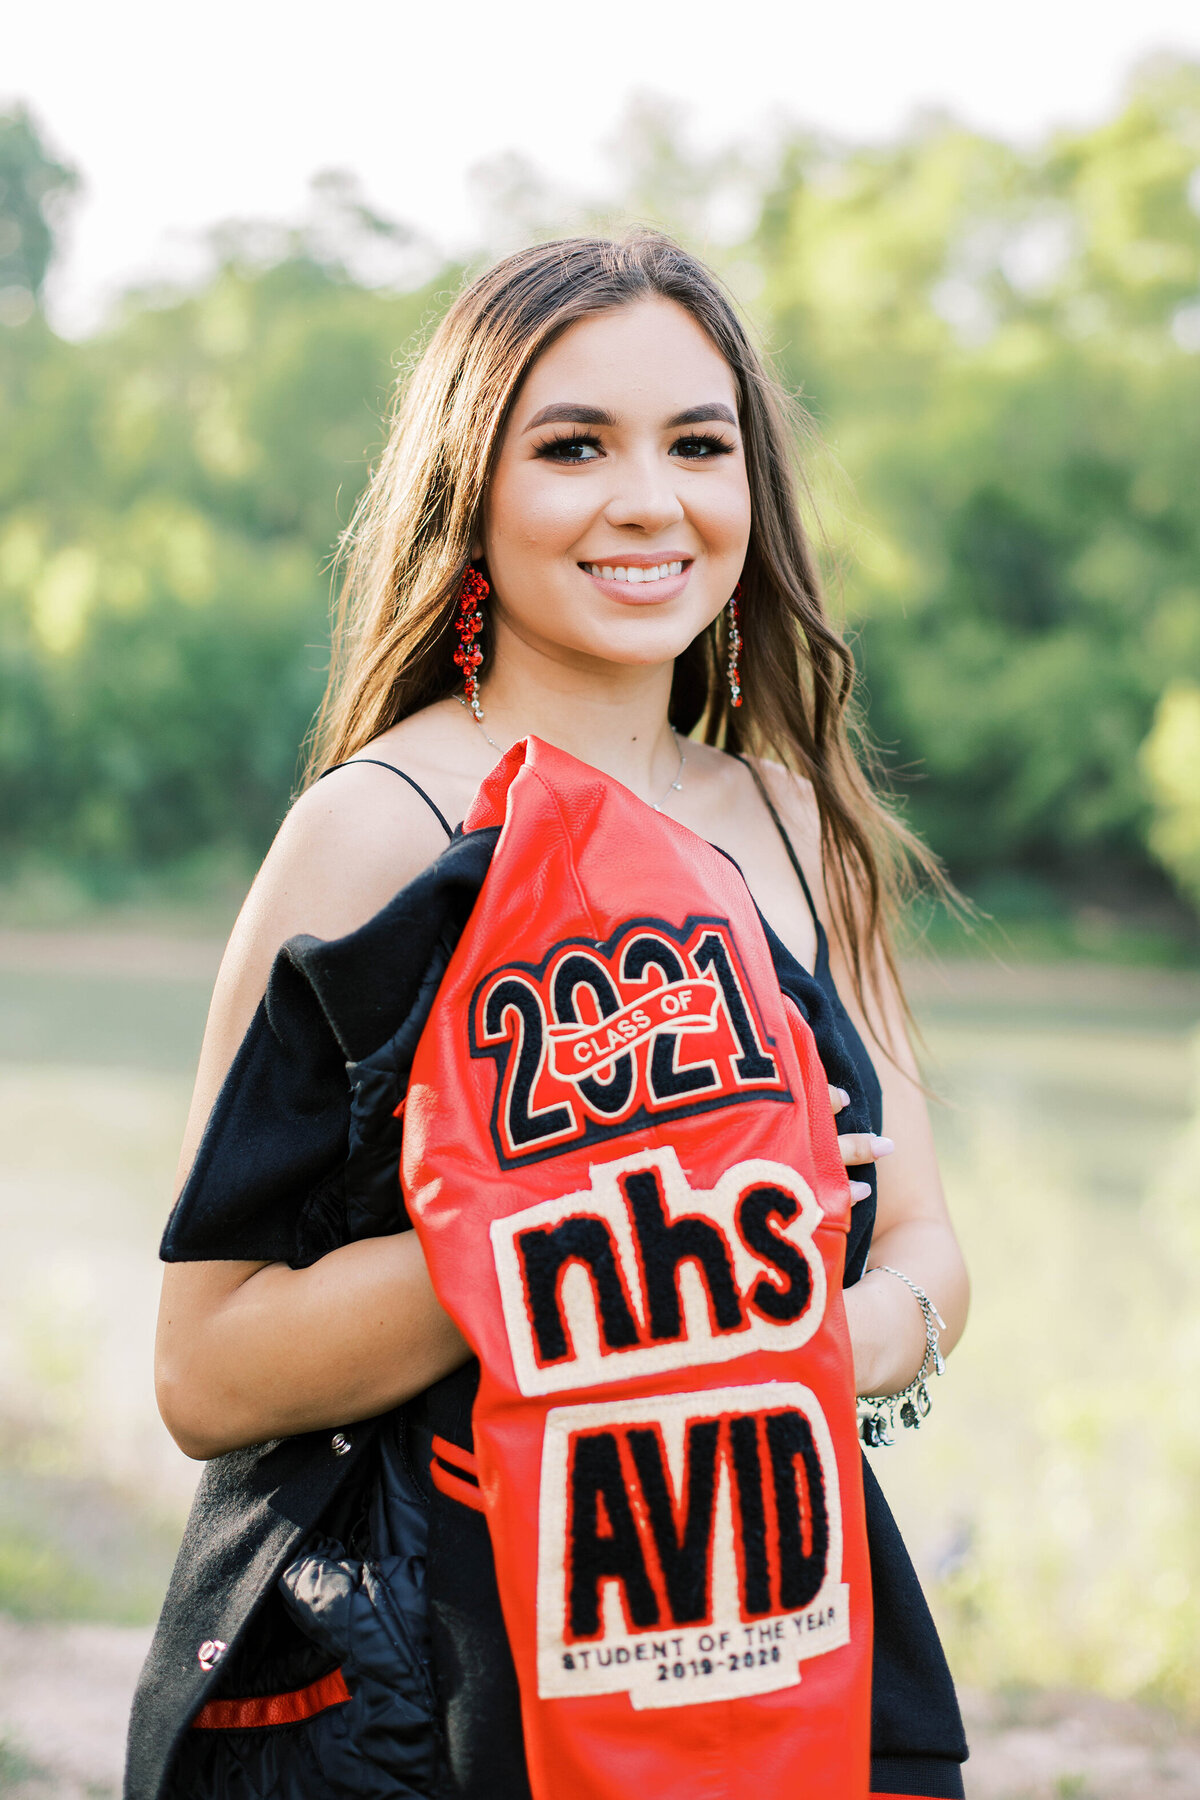 Senior Photography by Ink & Willow Photography | Victoria, TX